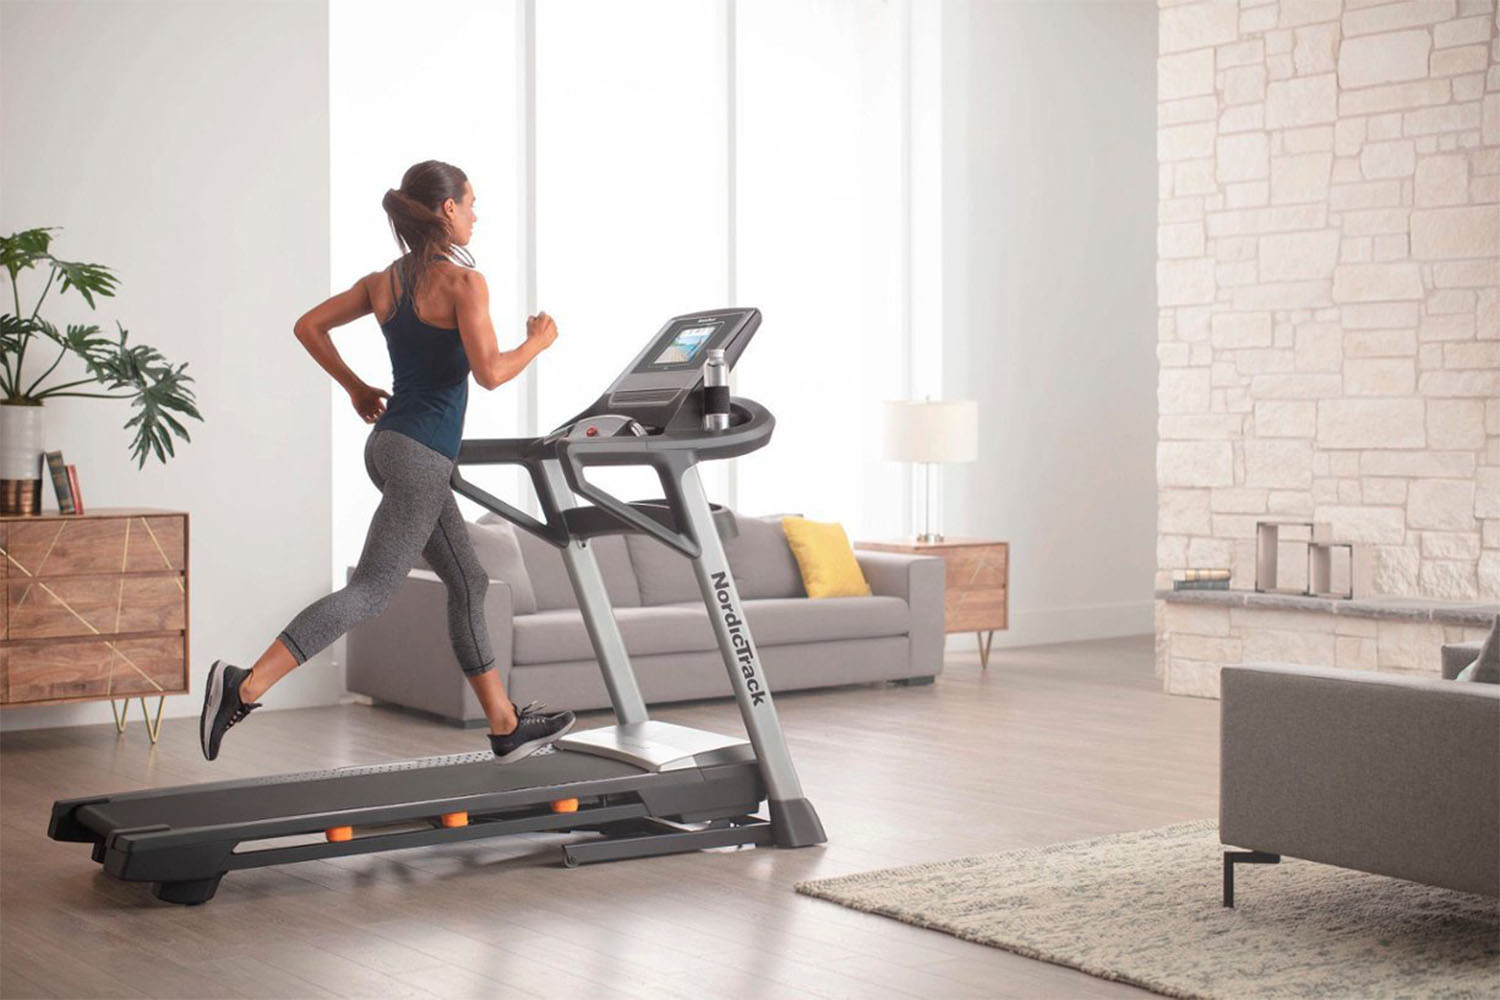 A woman using the NordicTrack T Series 8.5 S Treadmill in her living room.